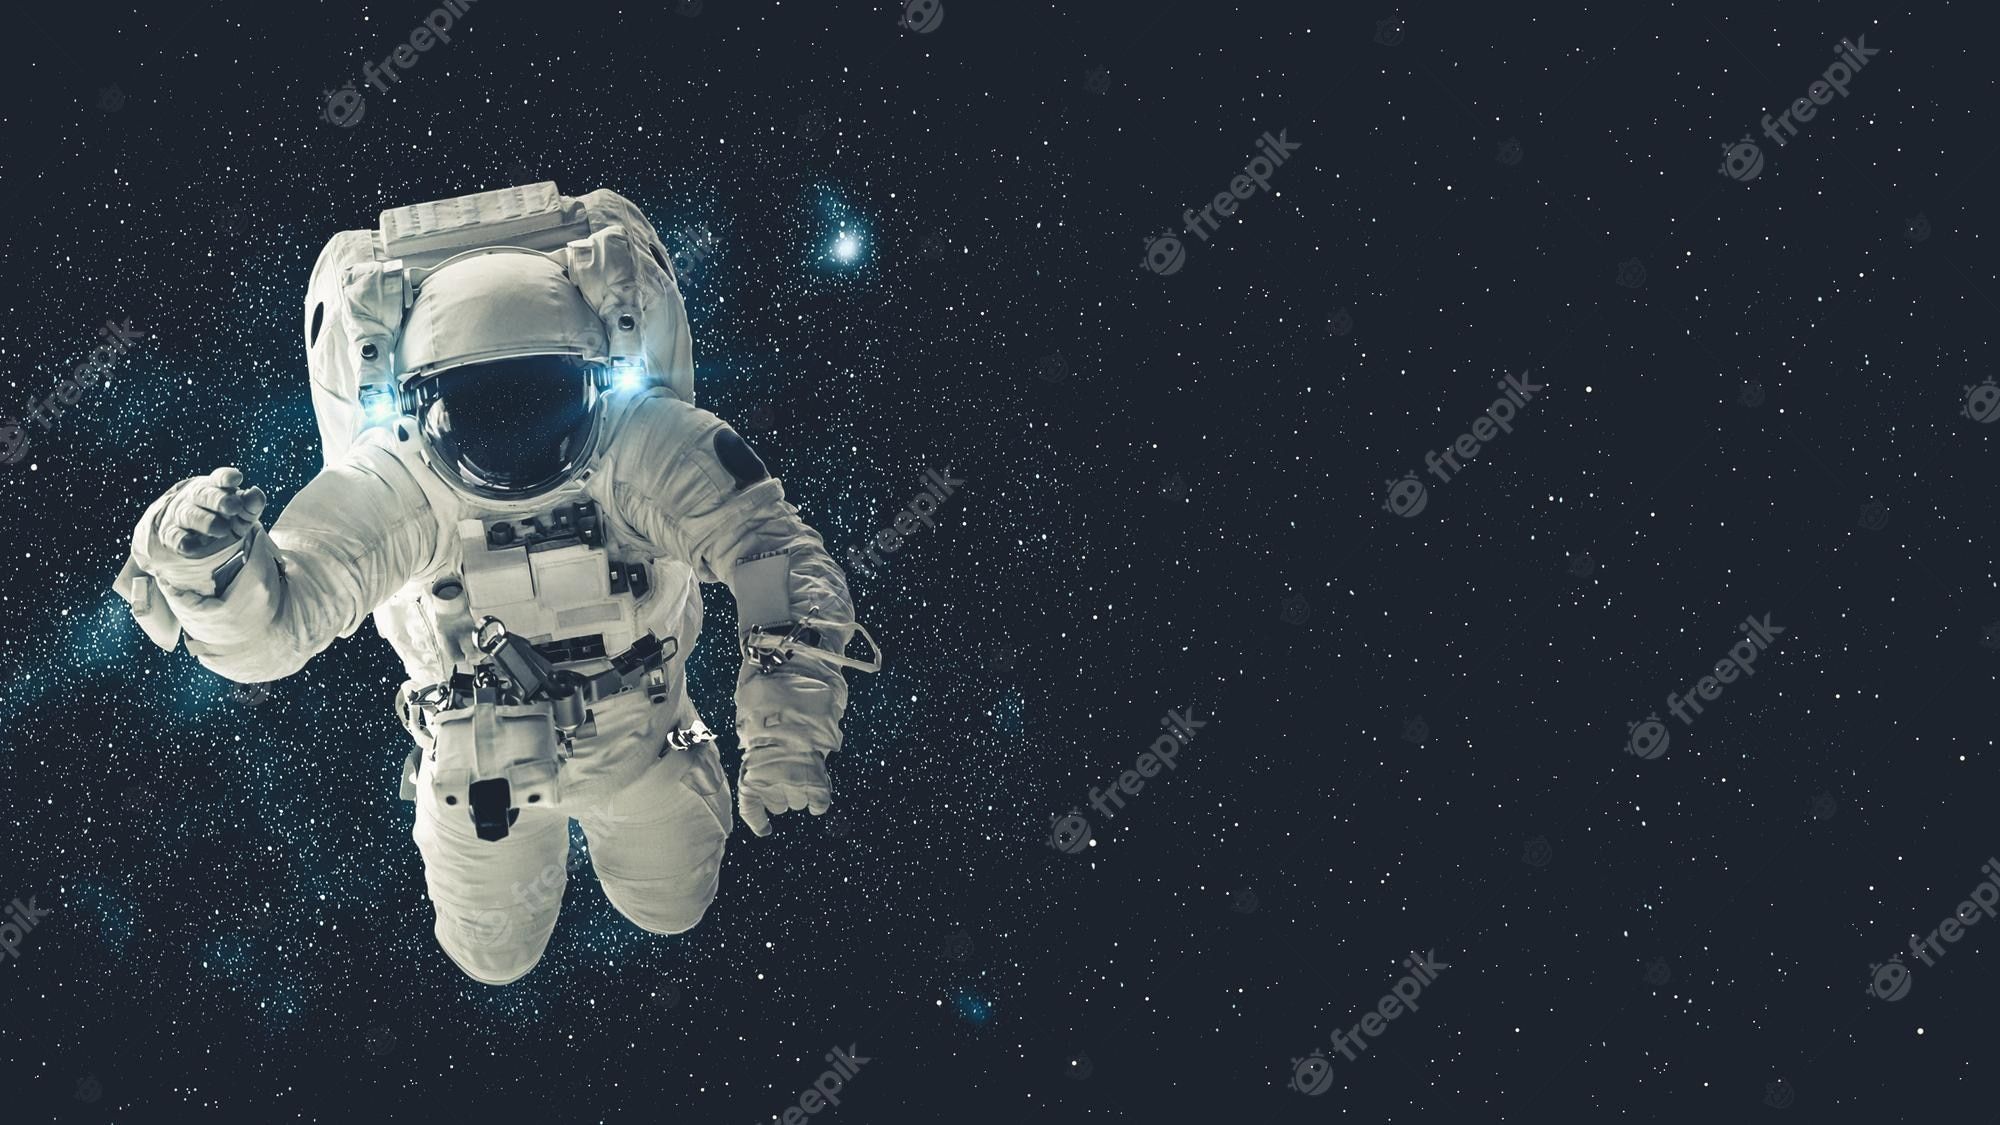 An astronaut floating in space with stars - Astronaut